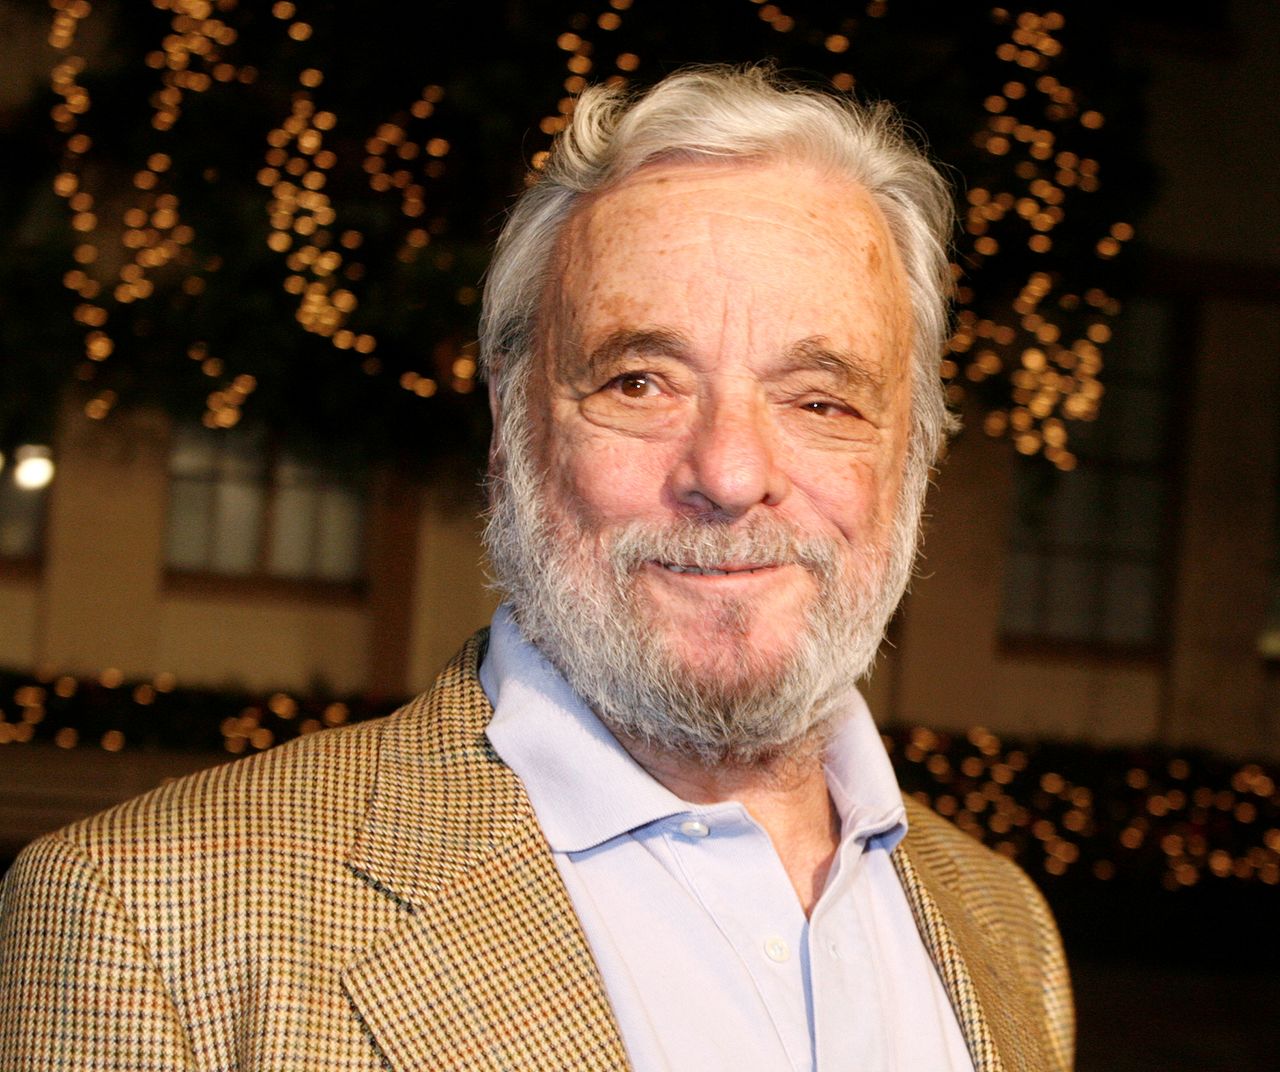 FILE PHOTO: Stephen Sondheim poses as he arrives at a special screening of the DreamWorks Pictures film "Sweeney Todd The Demon Barber of Fleet Street" at Paramount Studios in Hollywood, California December 5, 2007. REUTERS/Fred Prouser